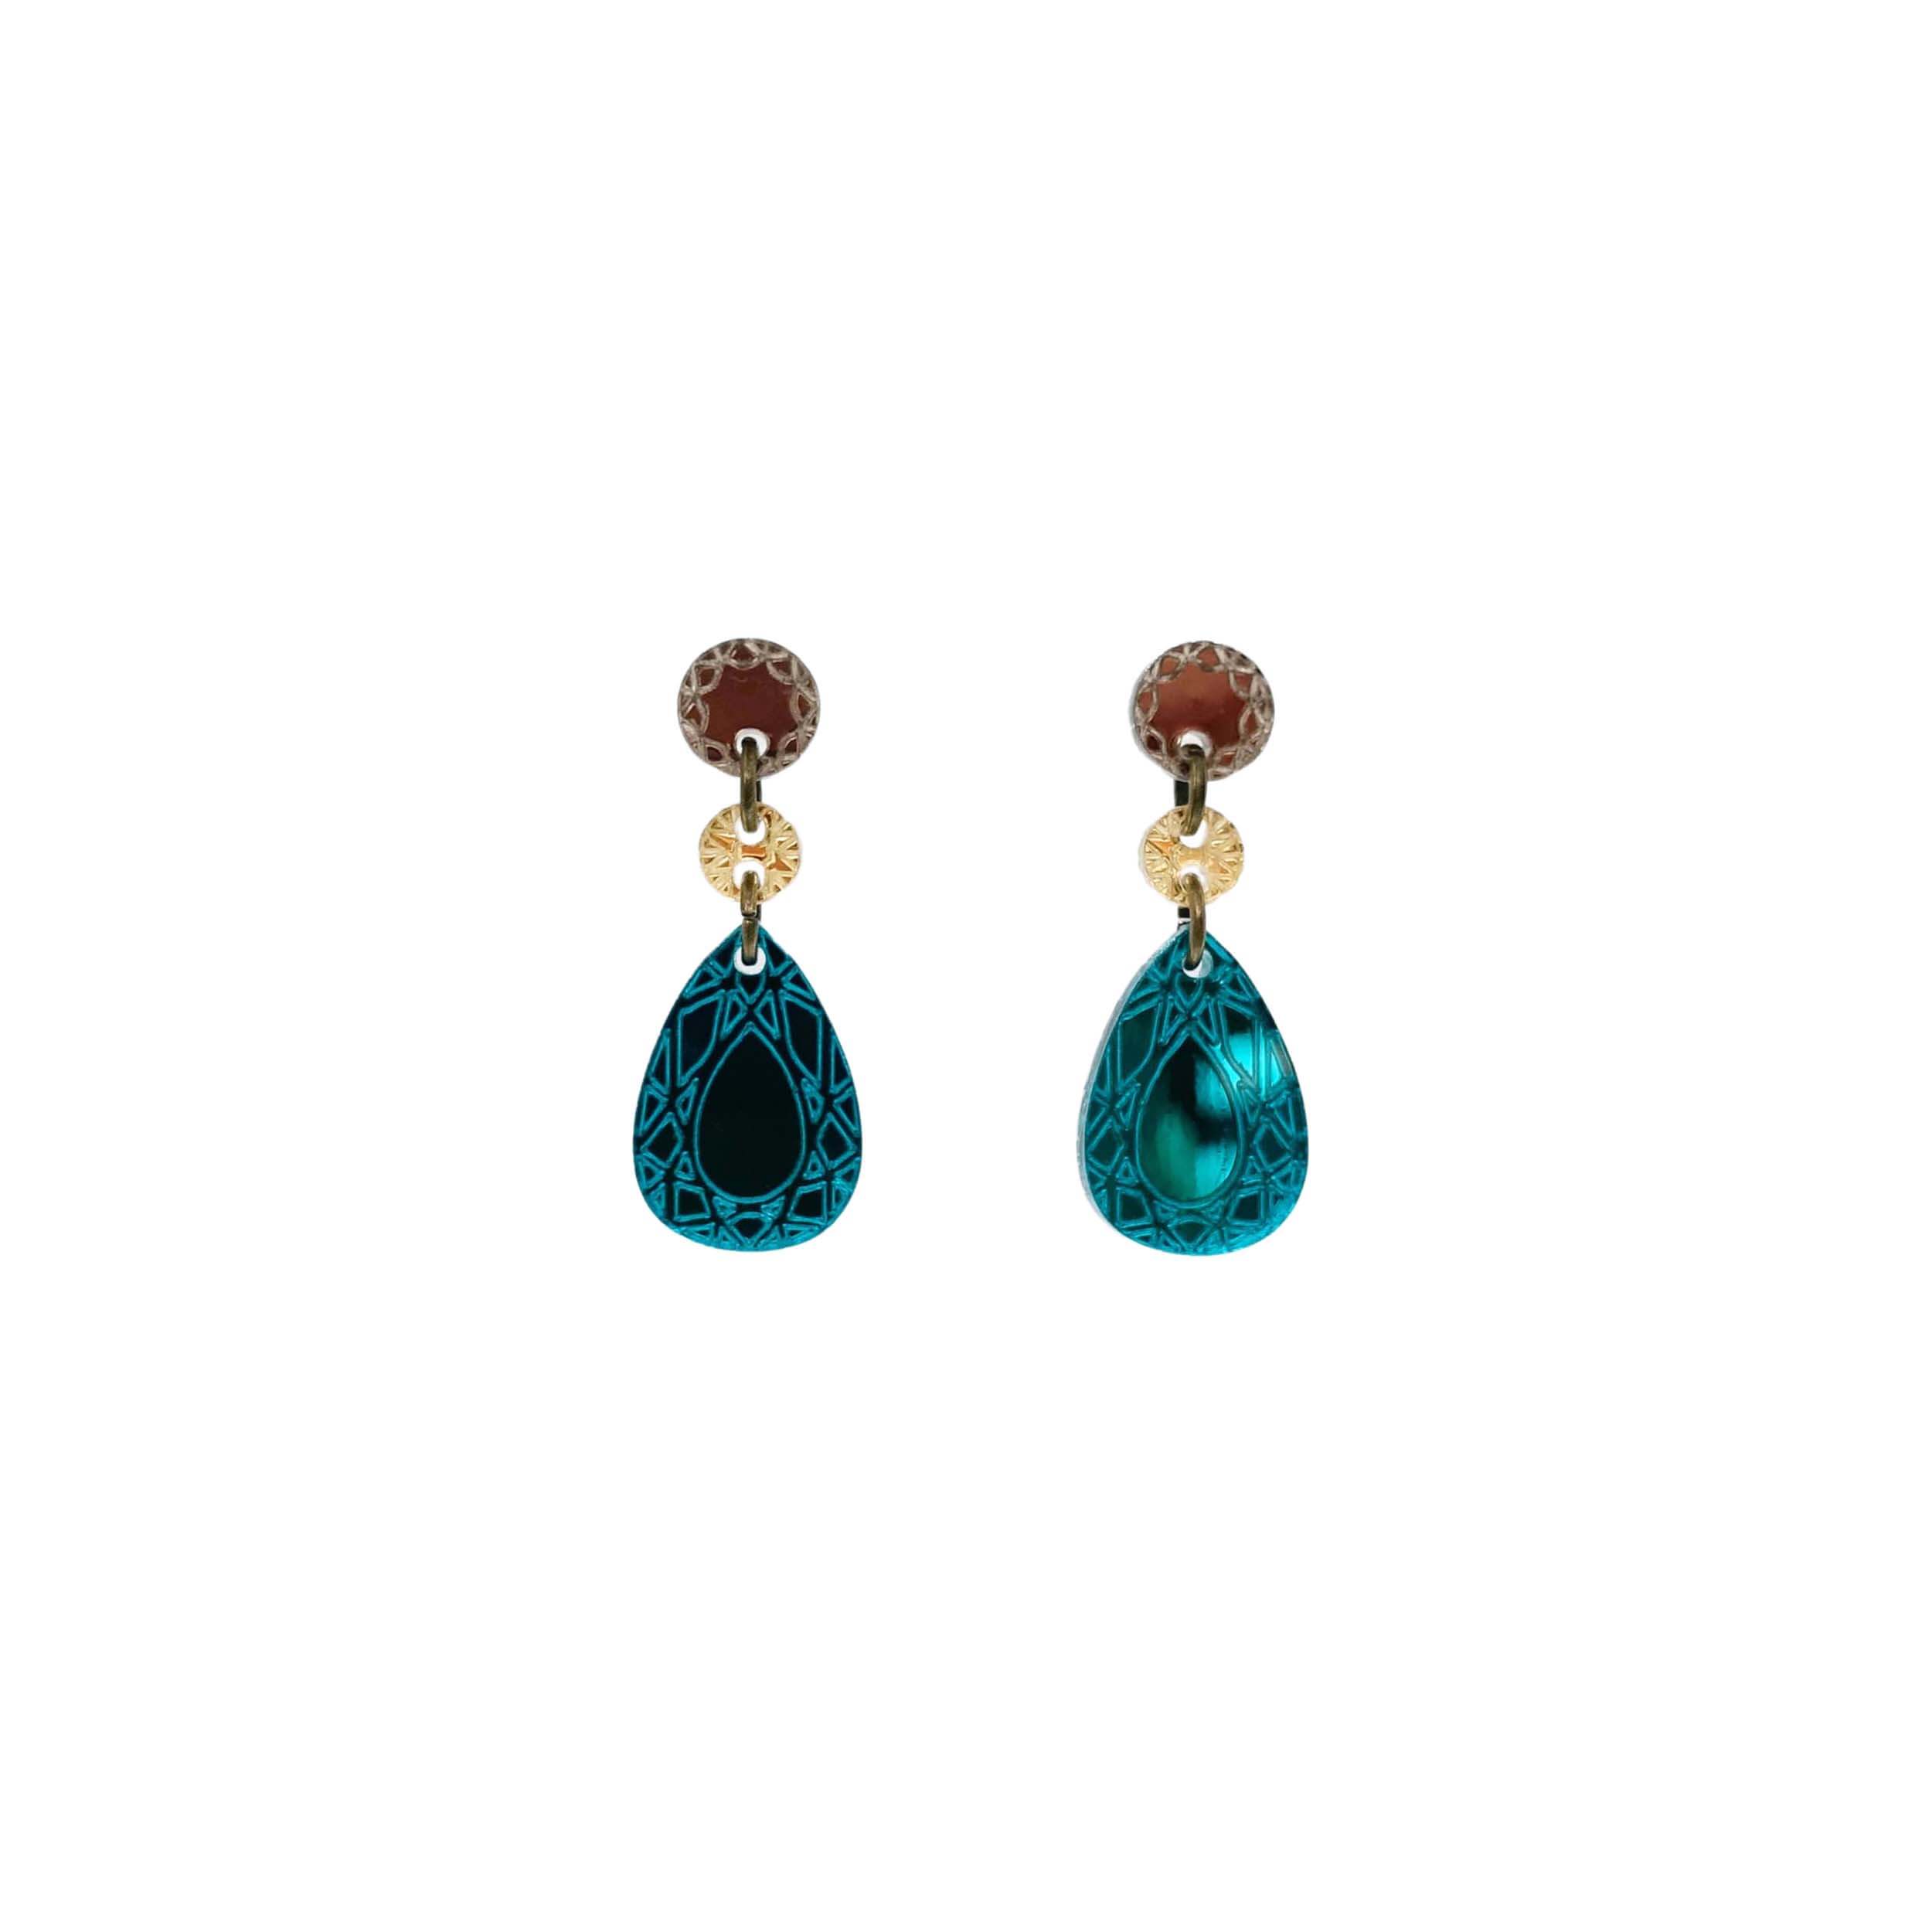 Belle Époque french drop earrings in teal mirror. These earrings are part of the Austerity Jewels Paris-inspired collection designed by Sarah Day for Wear and Resist. 